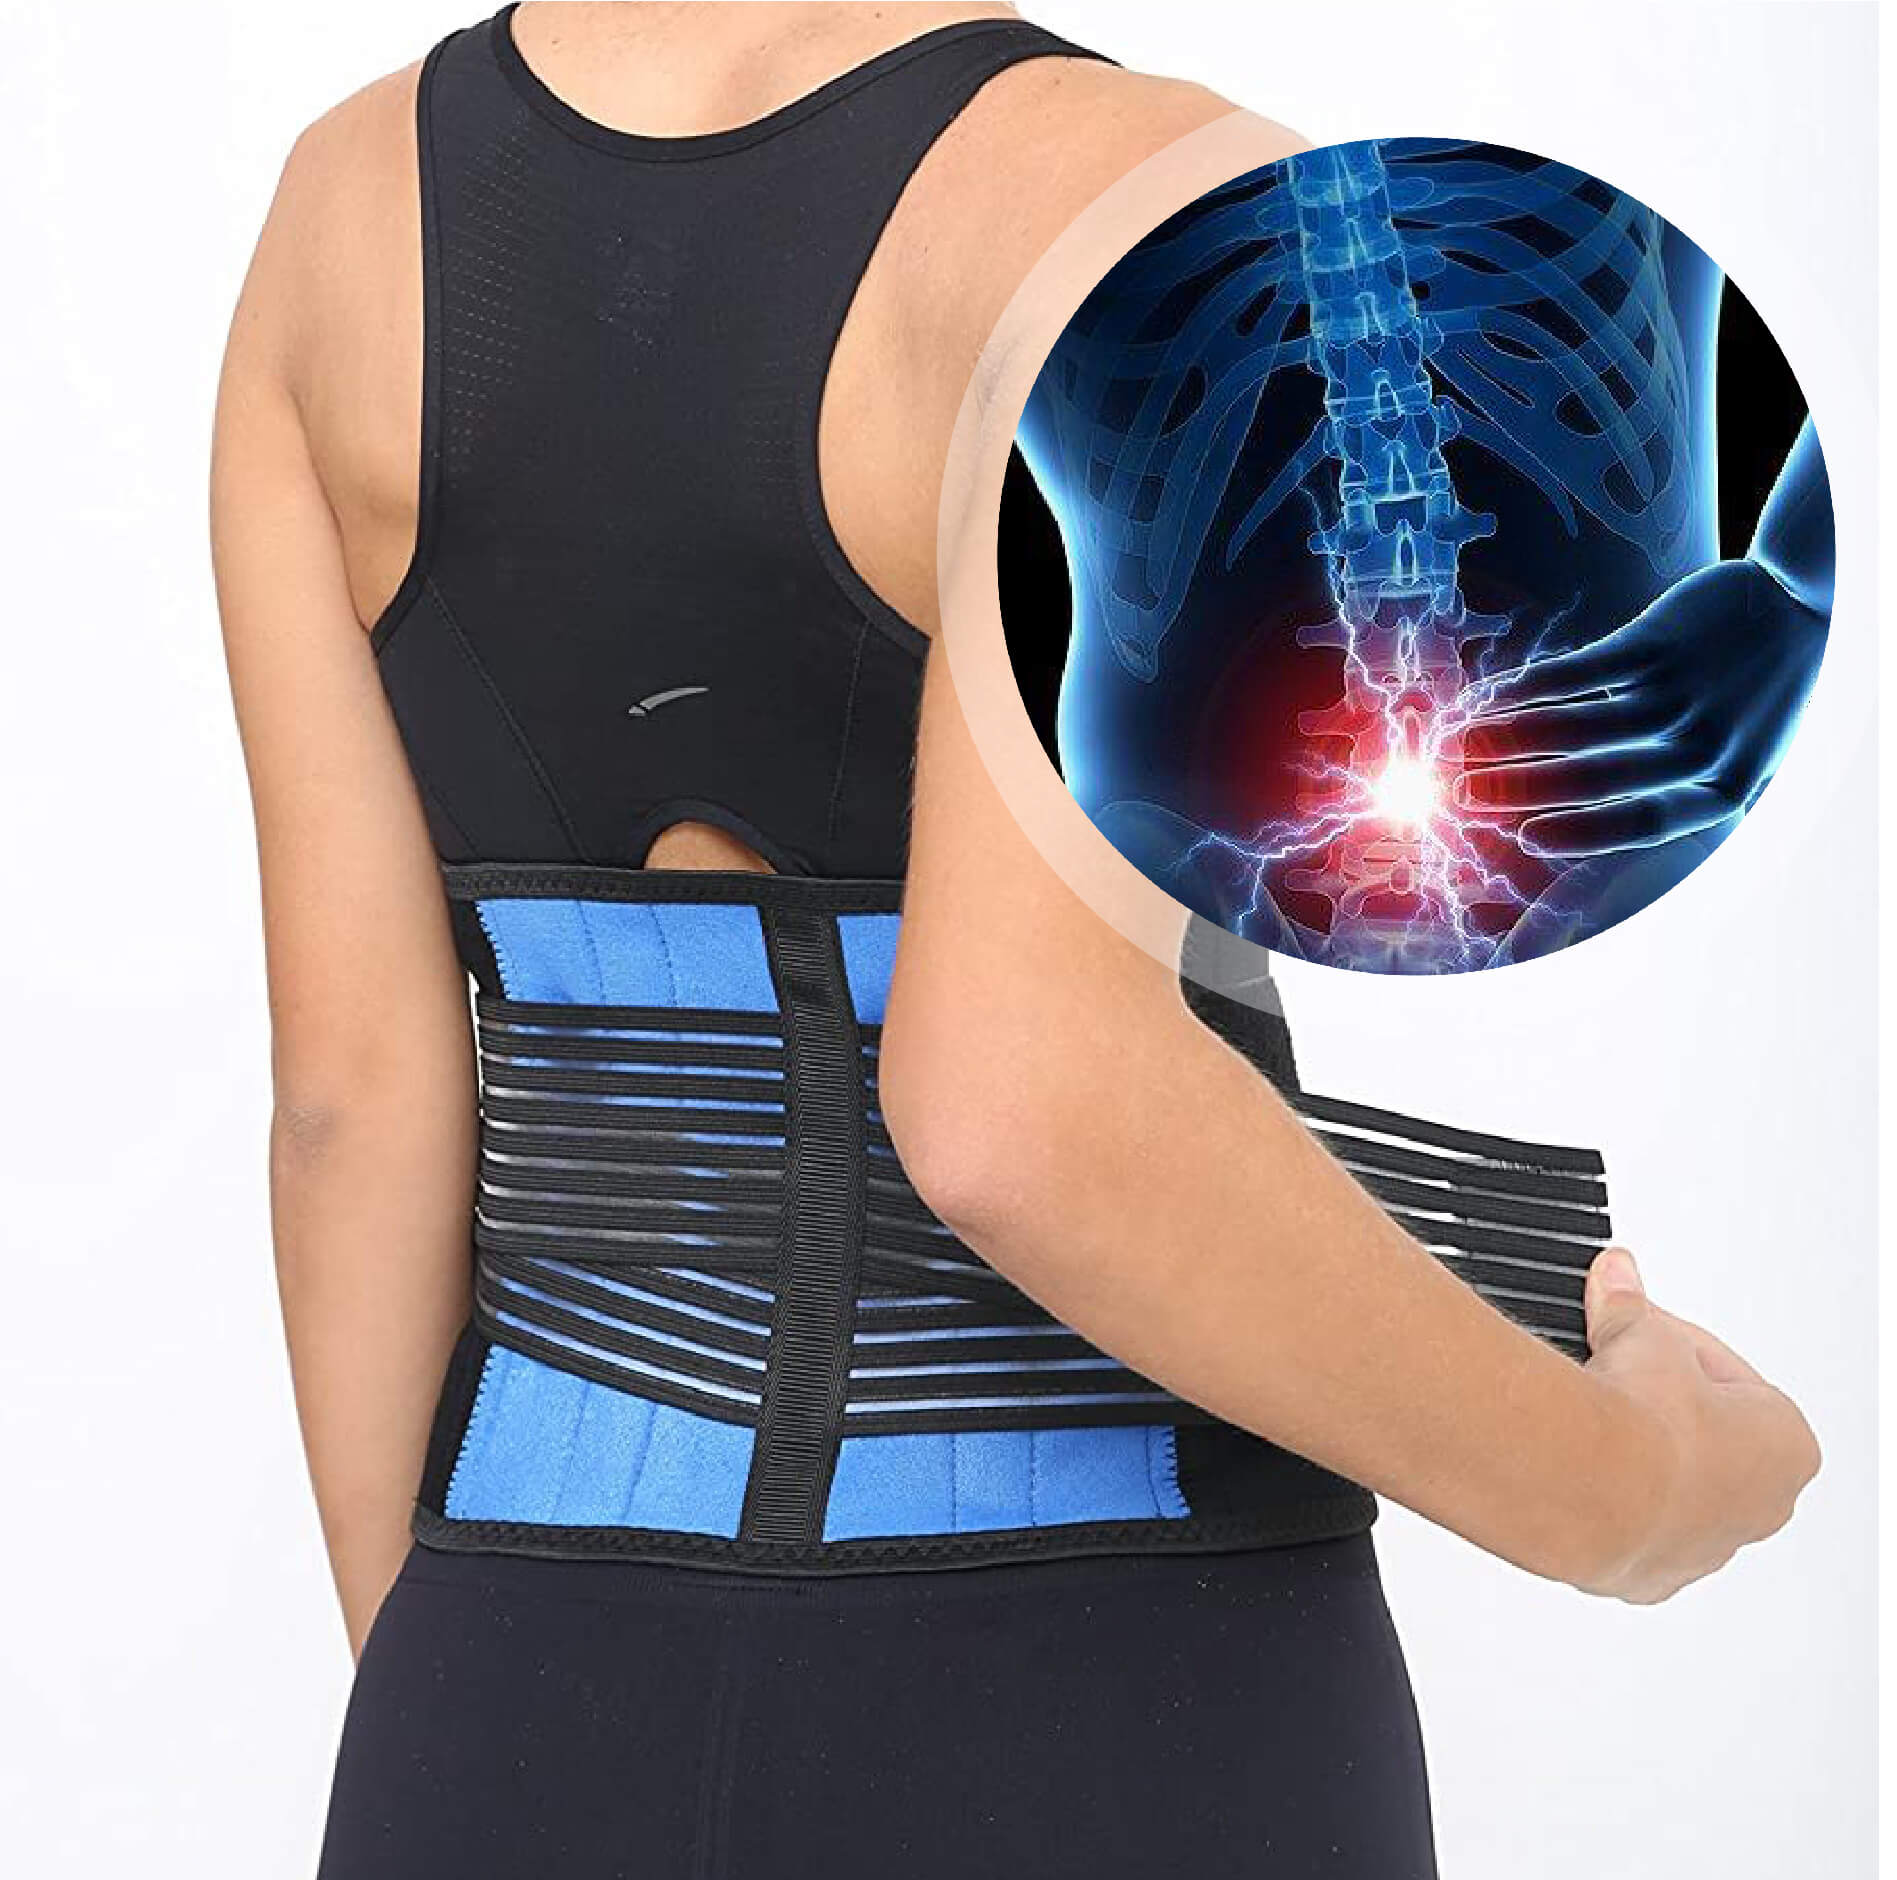 Dual Pull Elastic Crisscross Back SupportX Large  Lower right back pain,  Back pain, Lower back exercises